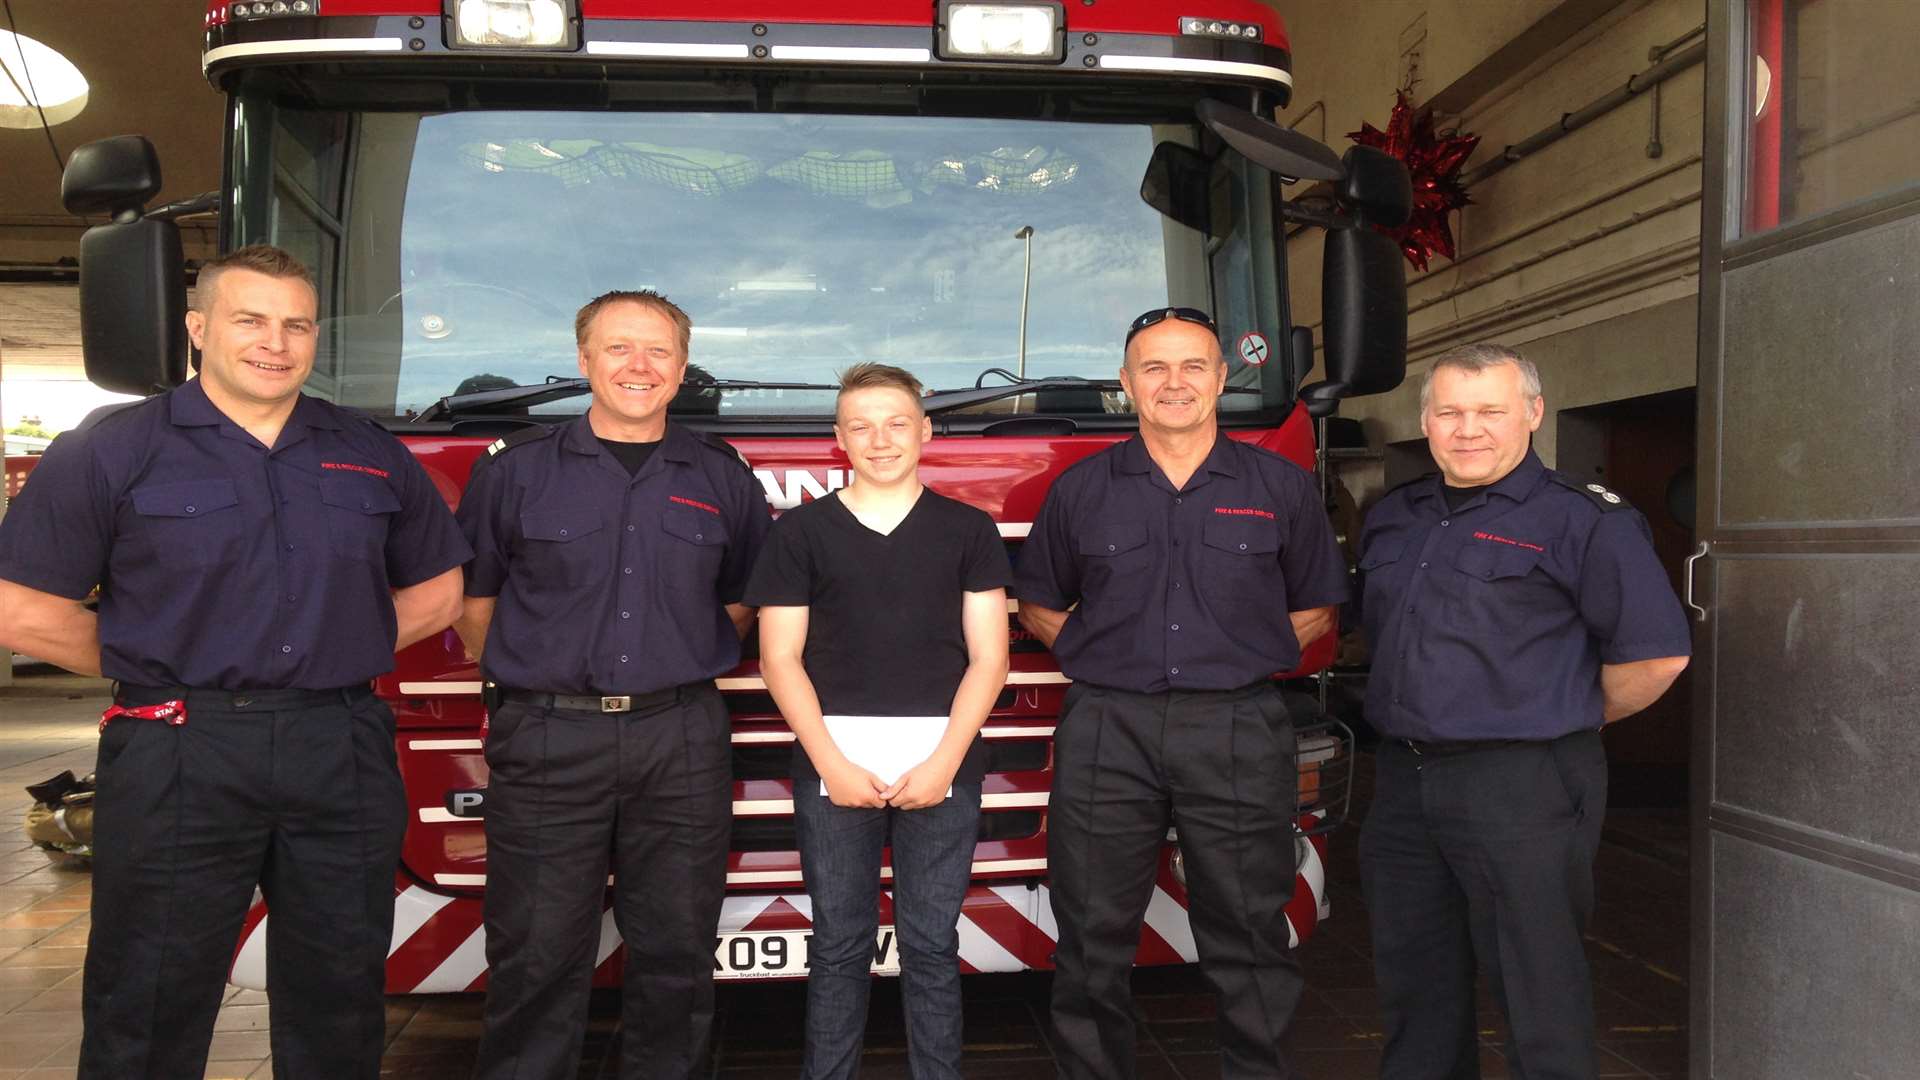 Ryan Smith, 16, with members of Red Watch at Medway Fire Station